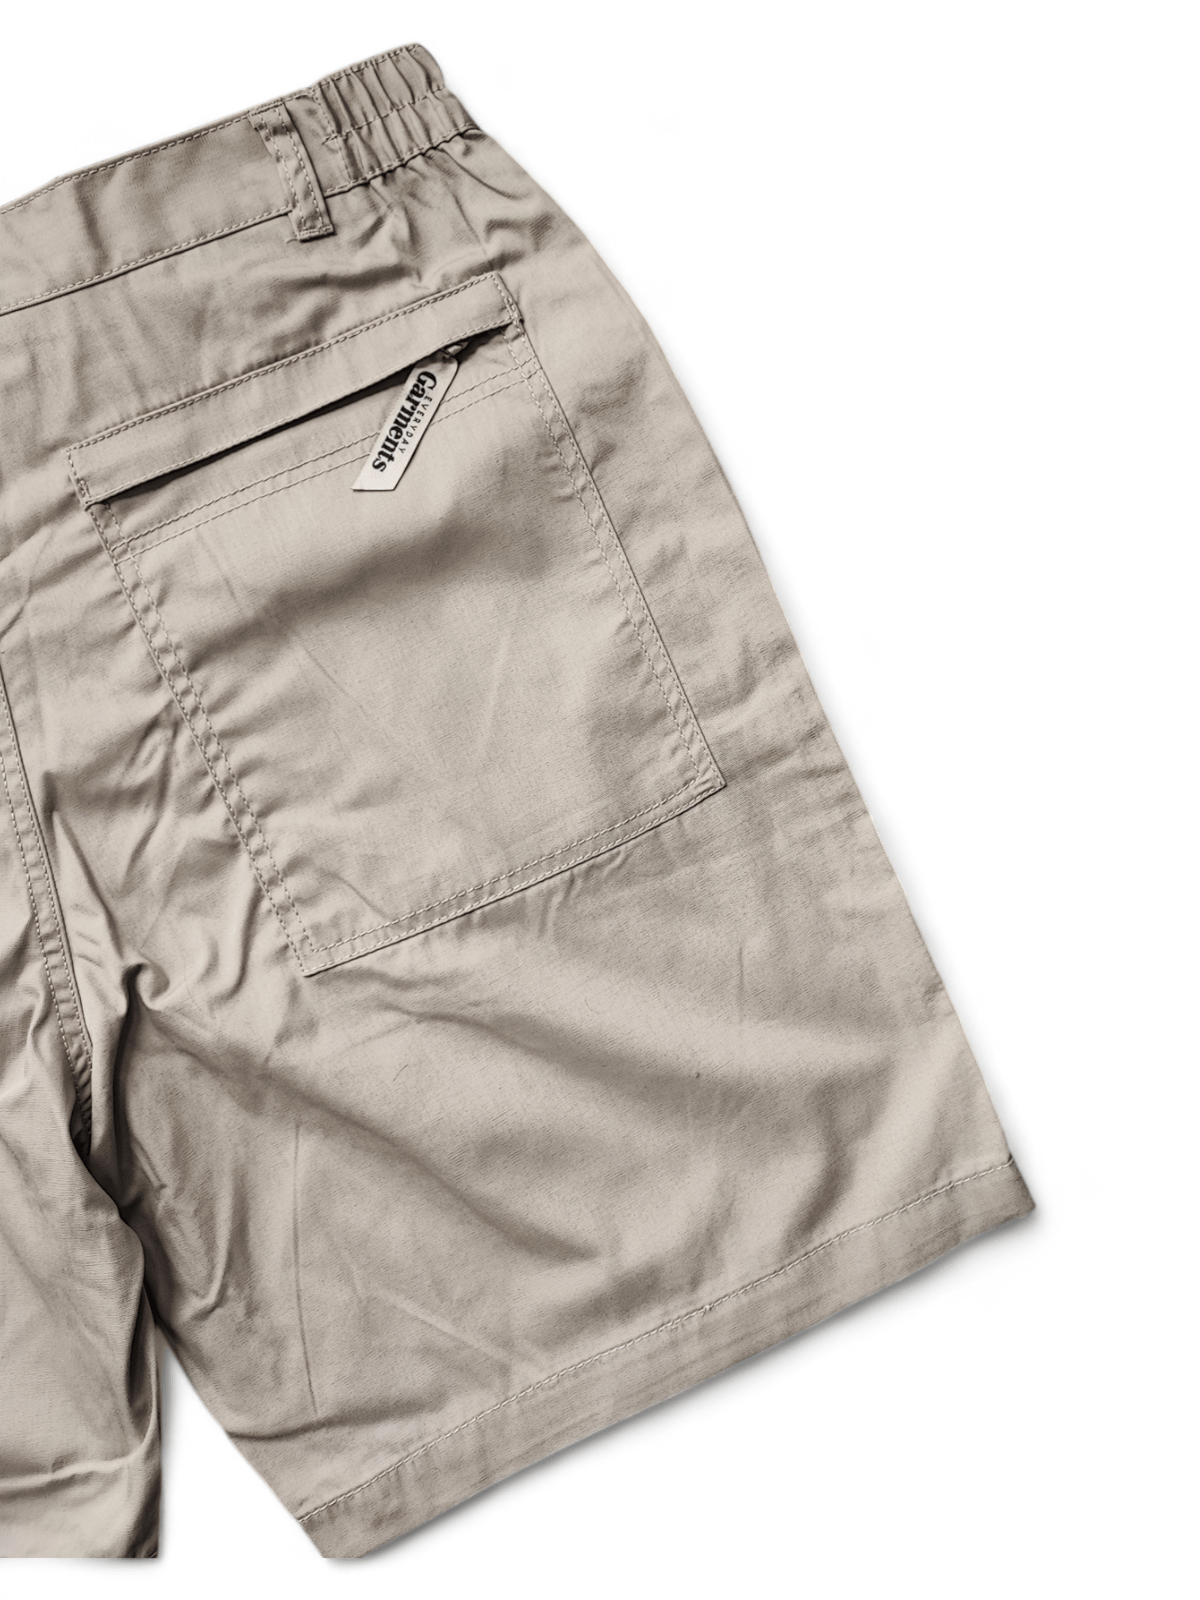 Image of "LLUDDED"FATIGUE SHORTS